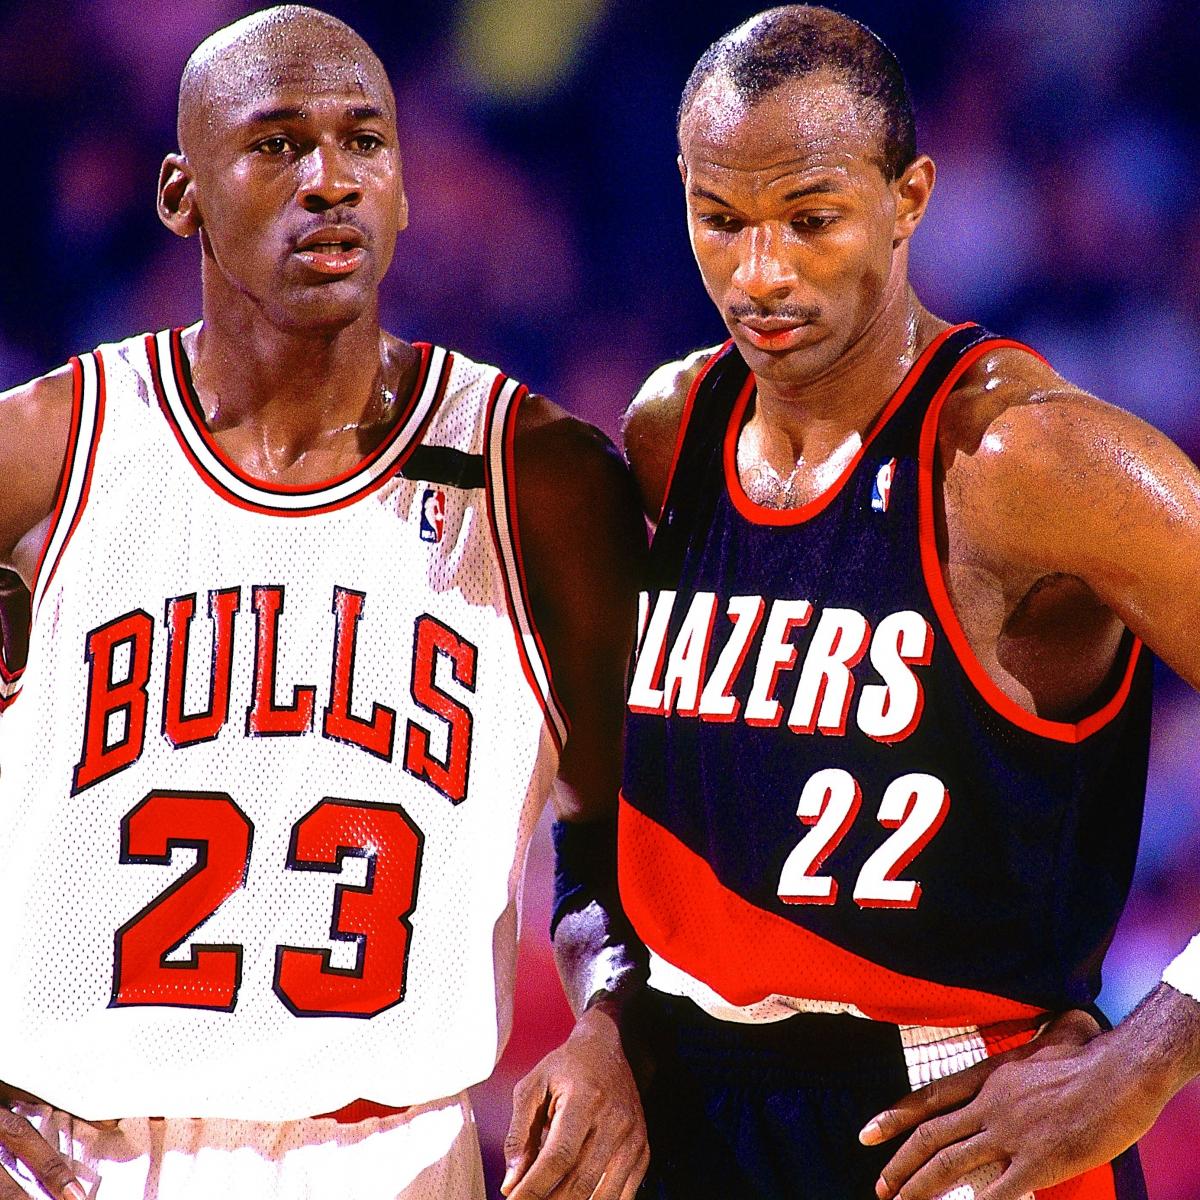 What is the most decorated jersey number in NBA history?